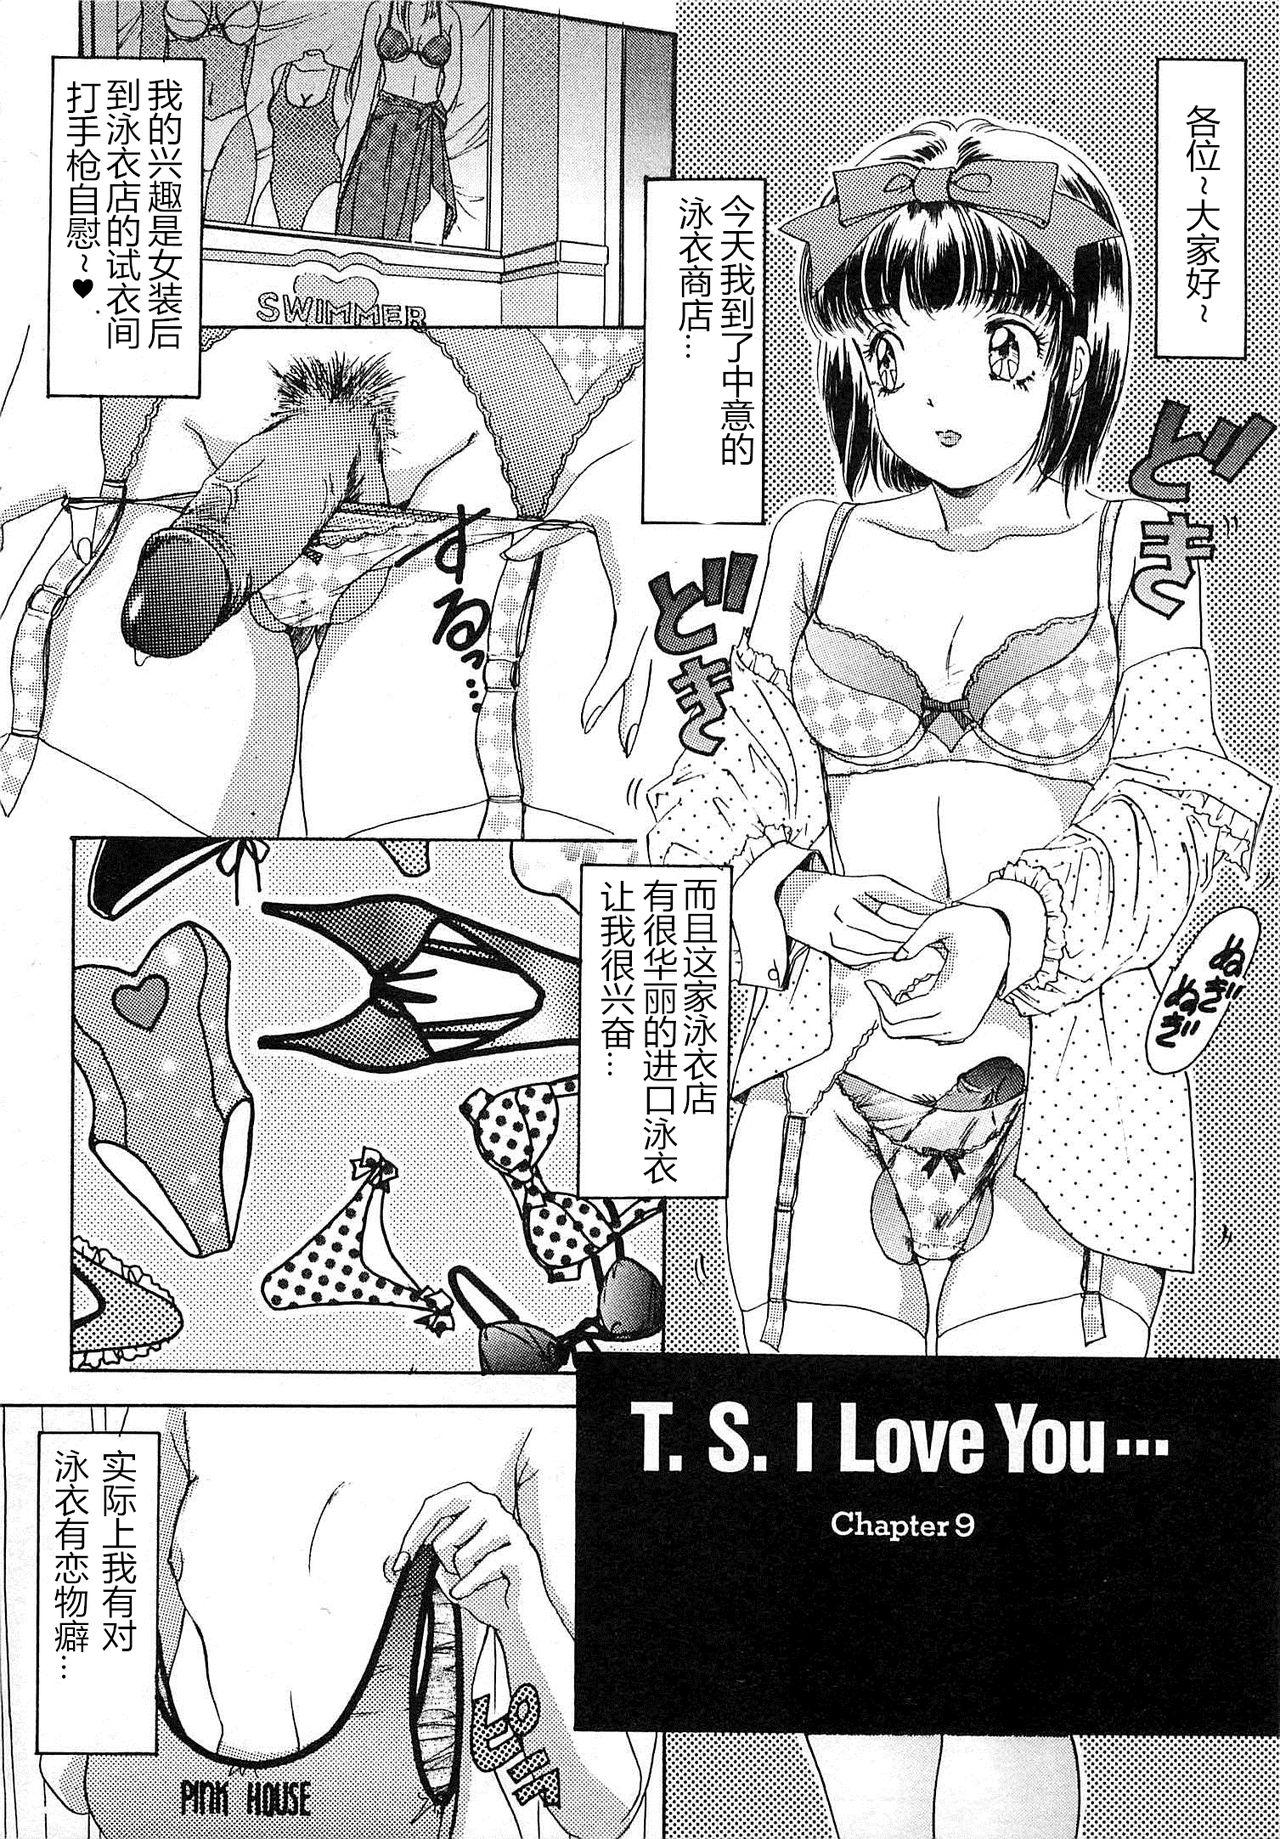 Hot Wife T.S. I LOVE YOU chapter 09 Women Sucking Dicks - Page 2